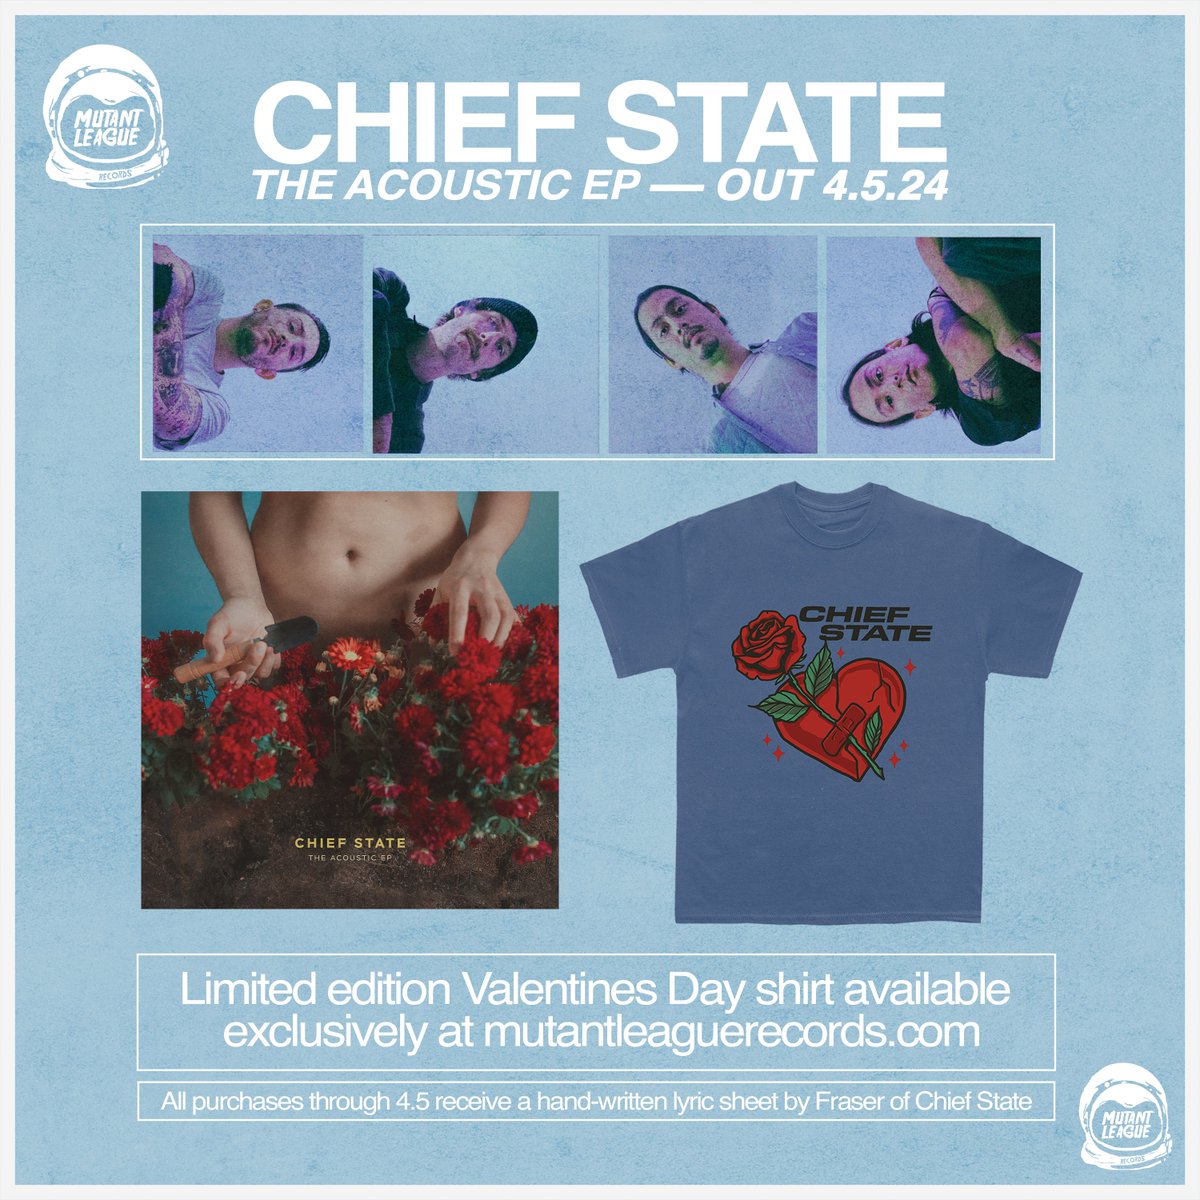 @chief_state ALSO just dropped an exclusive Valentine's Day-themed shirt design available now; all orders placed from now until April 5th will include a handwritten lyric by Fraser of Chief State! Purchase the limited Chief State 'Valentine's Day' Shirt: tinyurl.com/5dzfyzs8